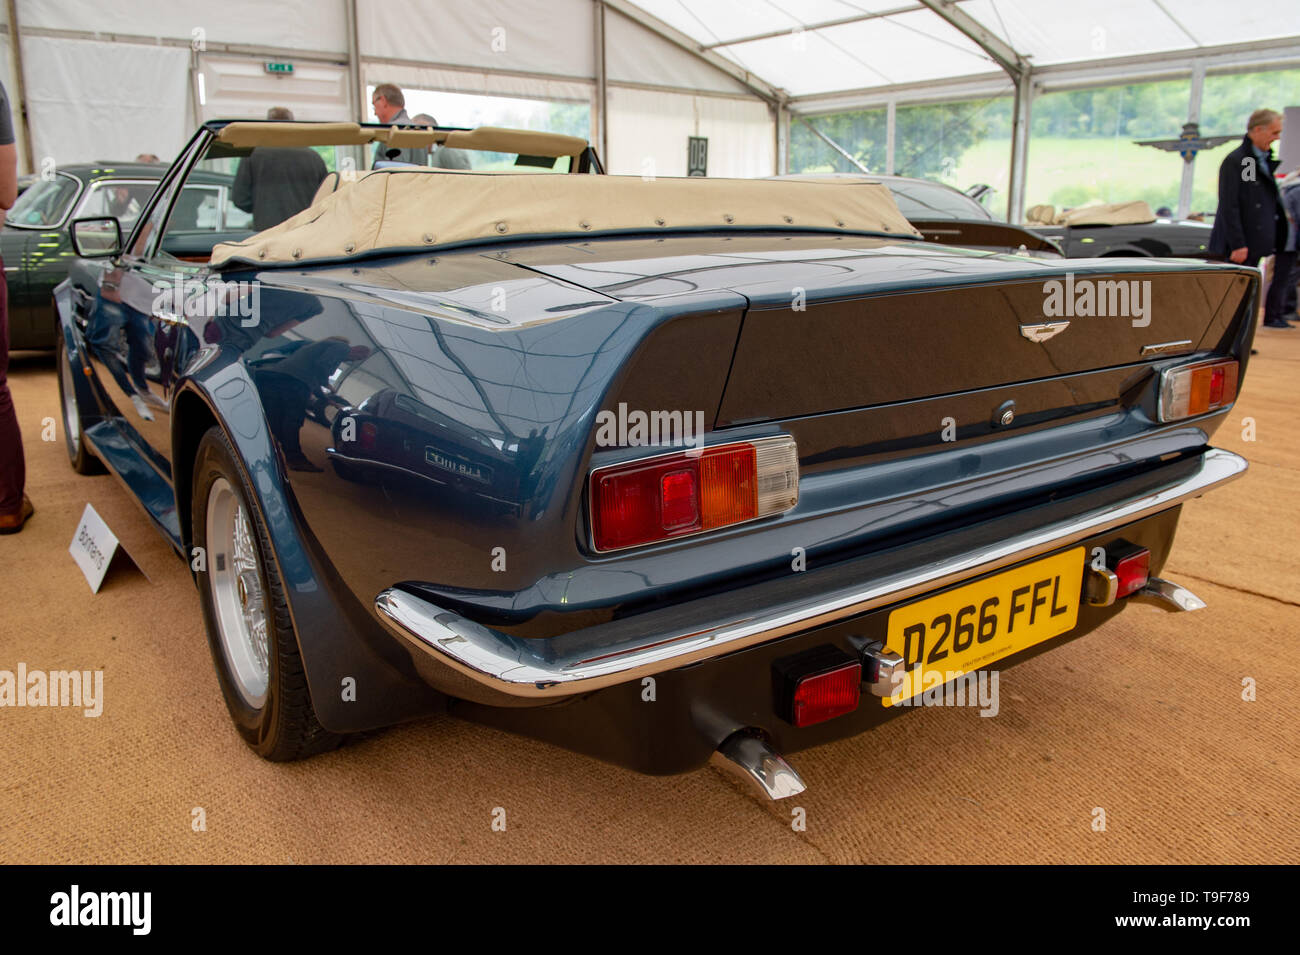 High Wycombe, United Kingdom. 18 May 2019. Bonhams put Aston Martin and Lagonda cars and related automobilia under the hammer at The Wormsley Estate in Buckinghamshire. PICTURED: 1987 Aston Martin V8 Vantage 'X-Pack' Volante. Credit: Peter Manning/Alamy Live News Stock Photo